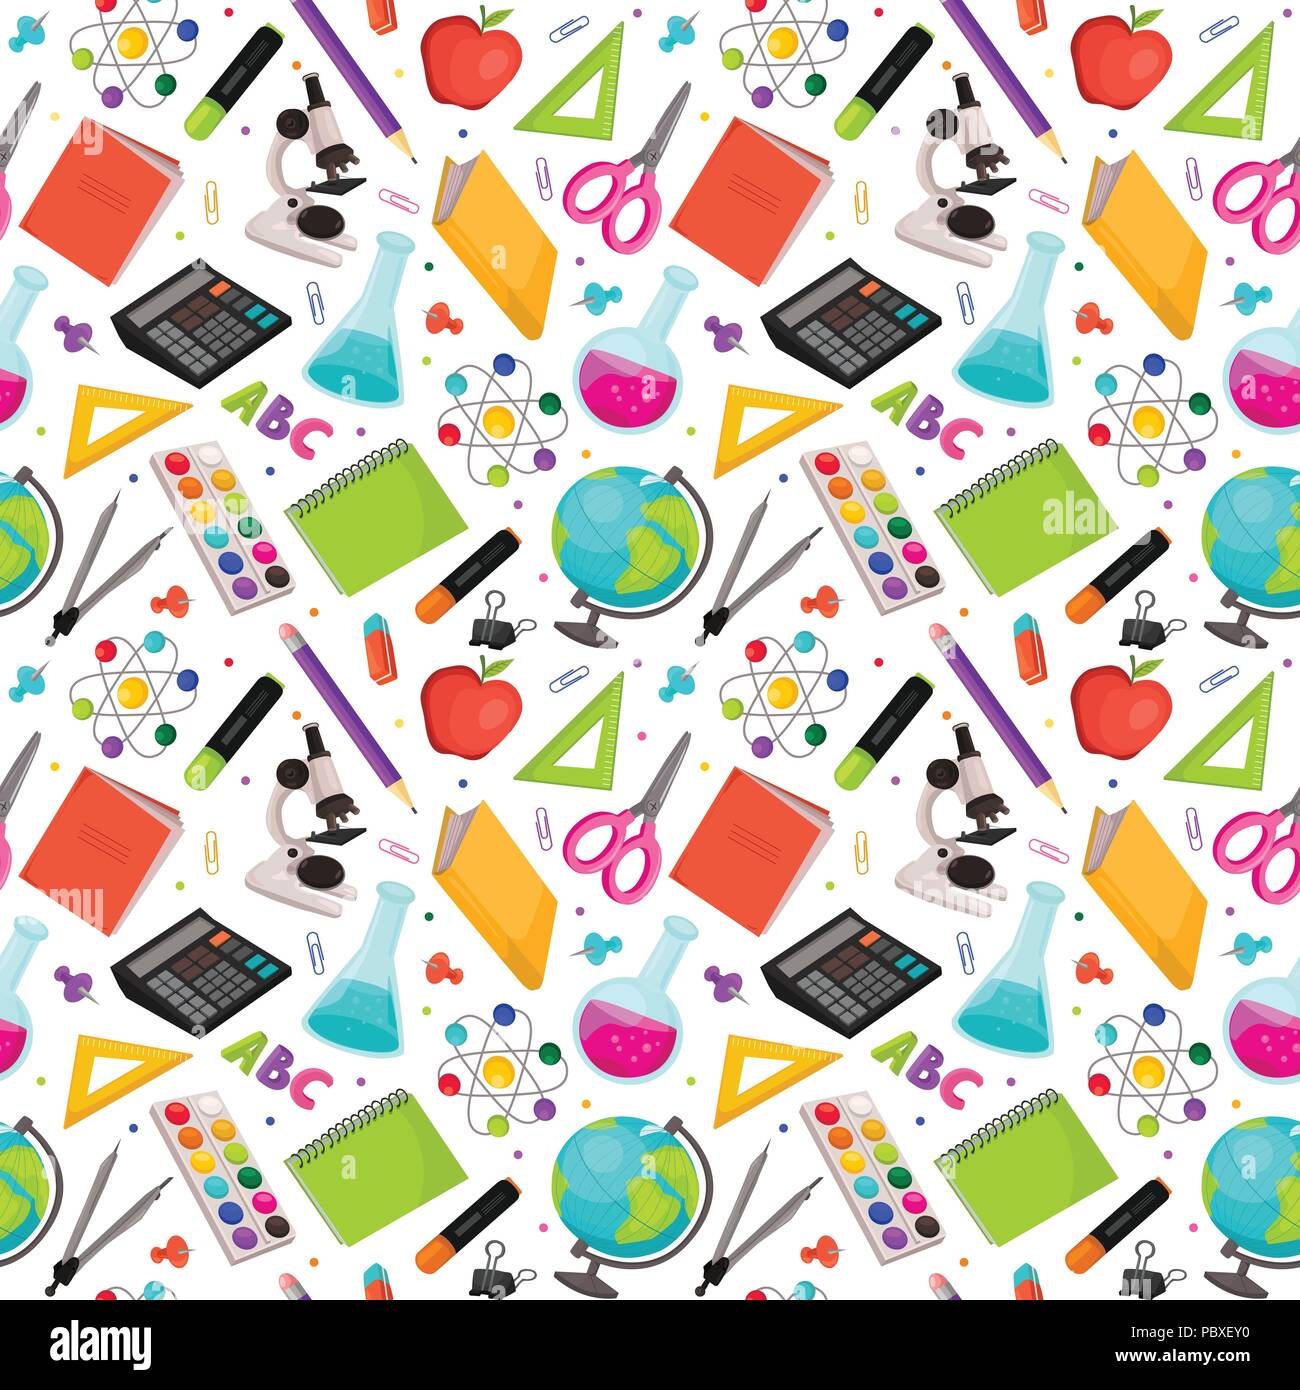 School Doodle Background Vector Seamless Pattern From School